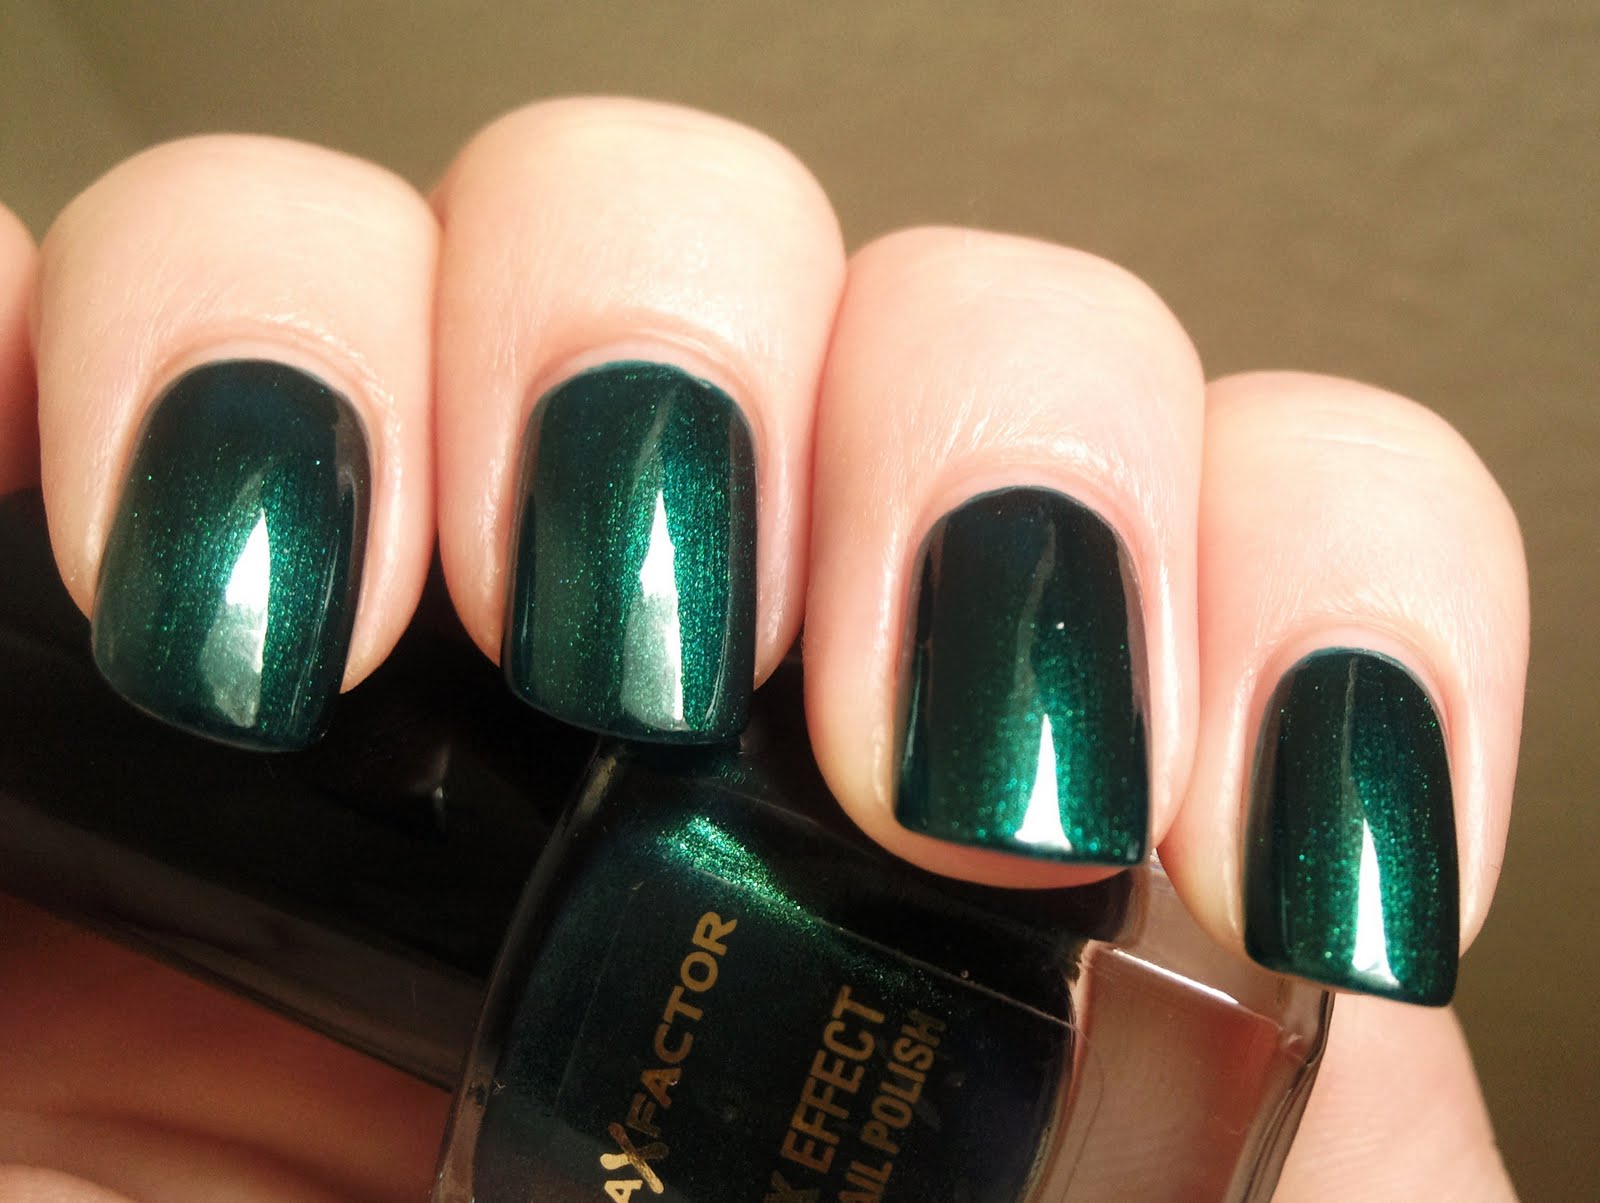 1. "Emerald Green Nail Polish Shades to Complement Your Dress" - wide 4